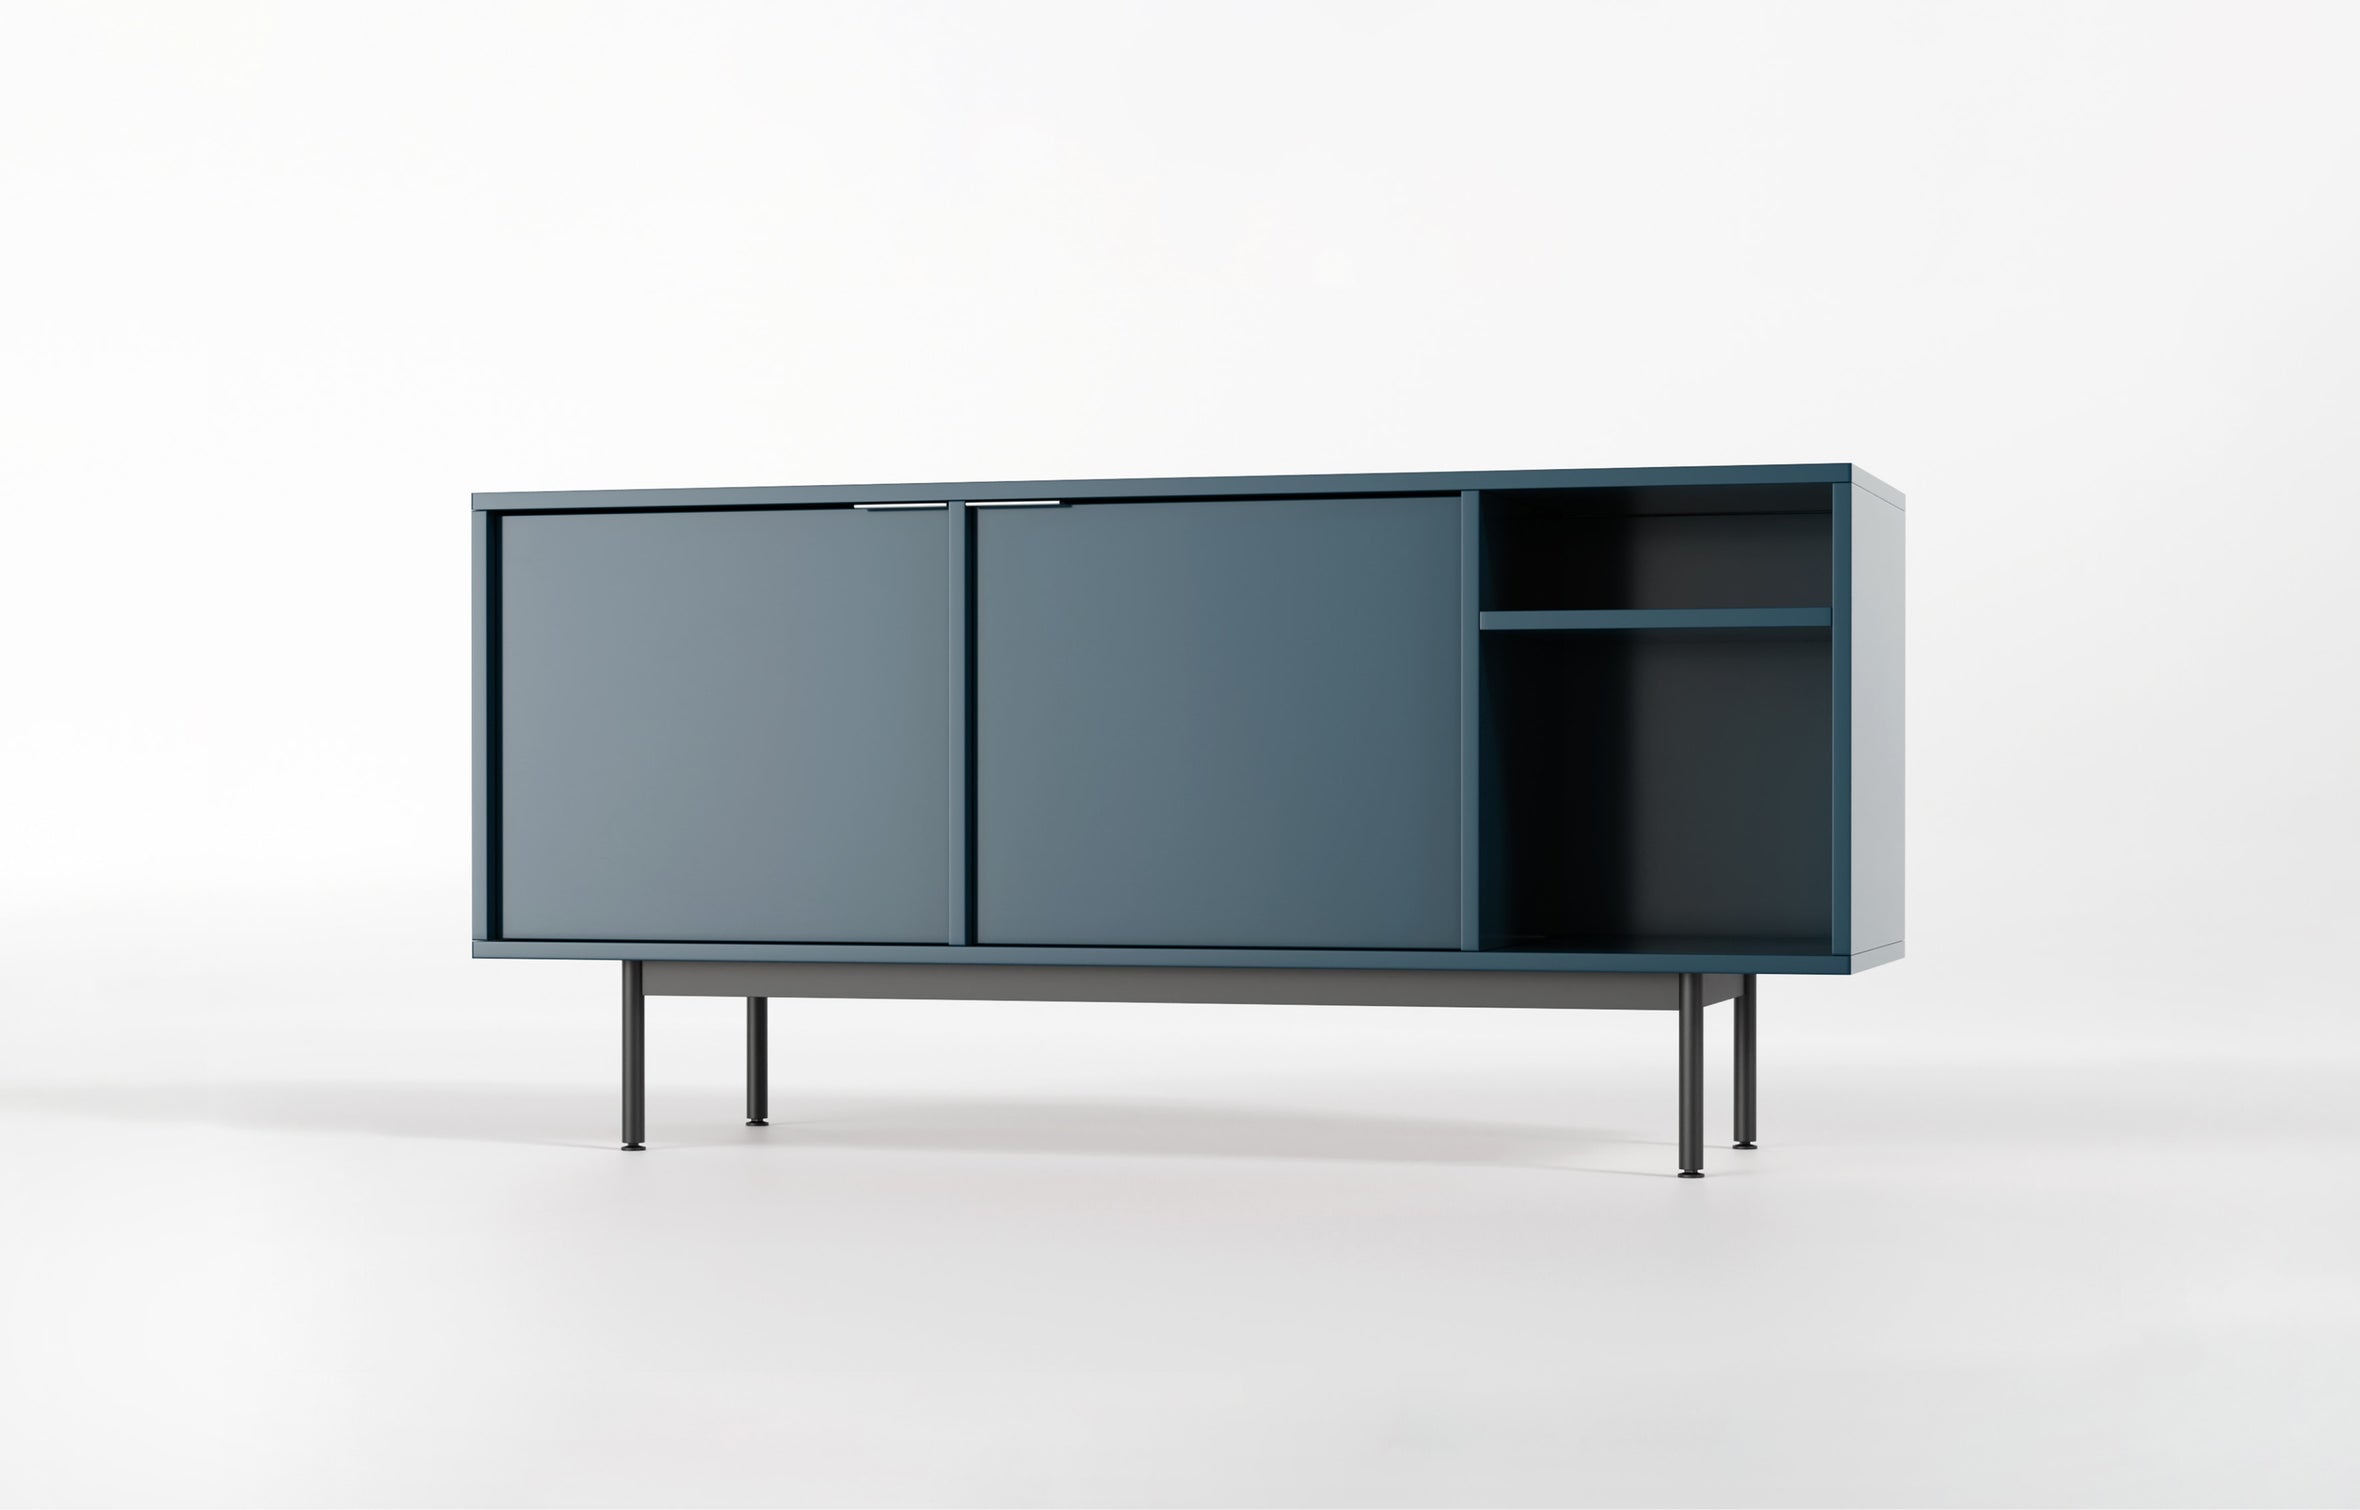 Outline TV stand | ff&e dorm furniture manufacturers | Roomy | Chicago